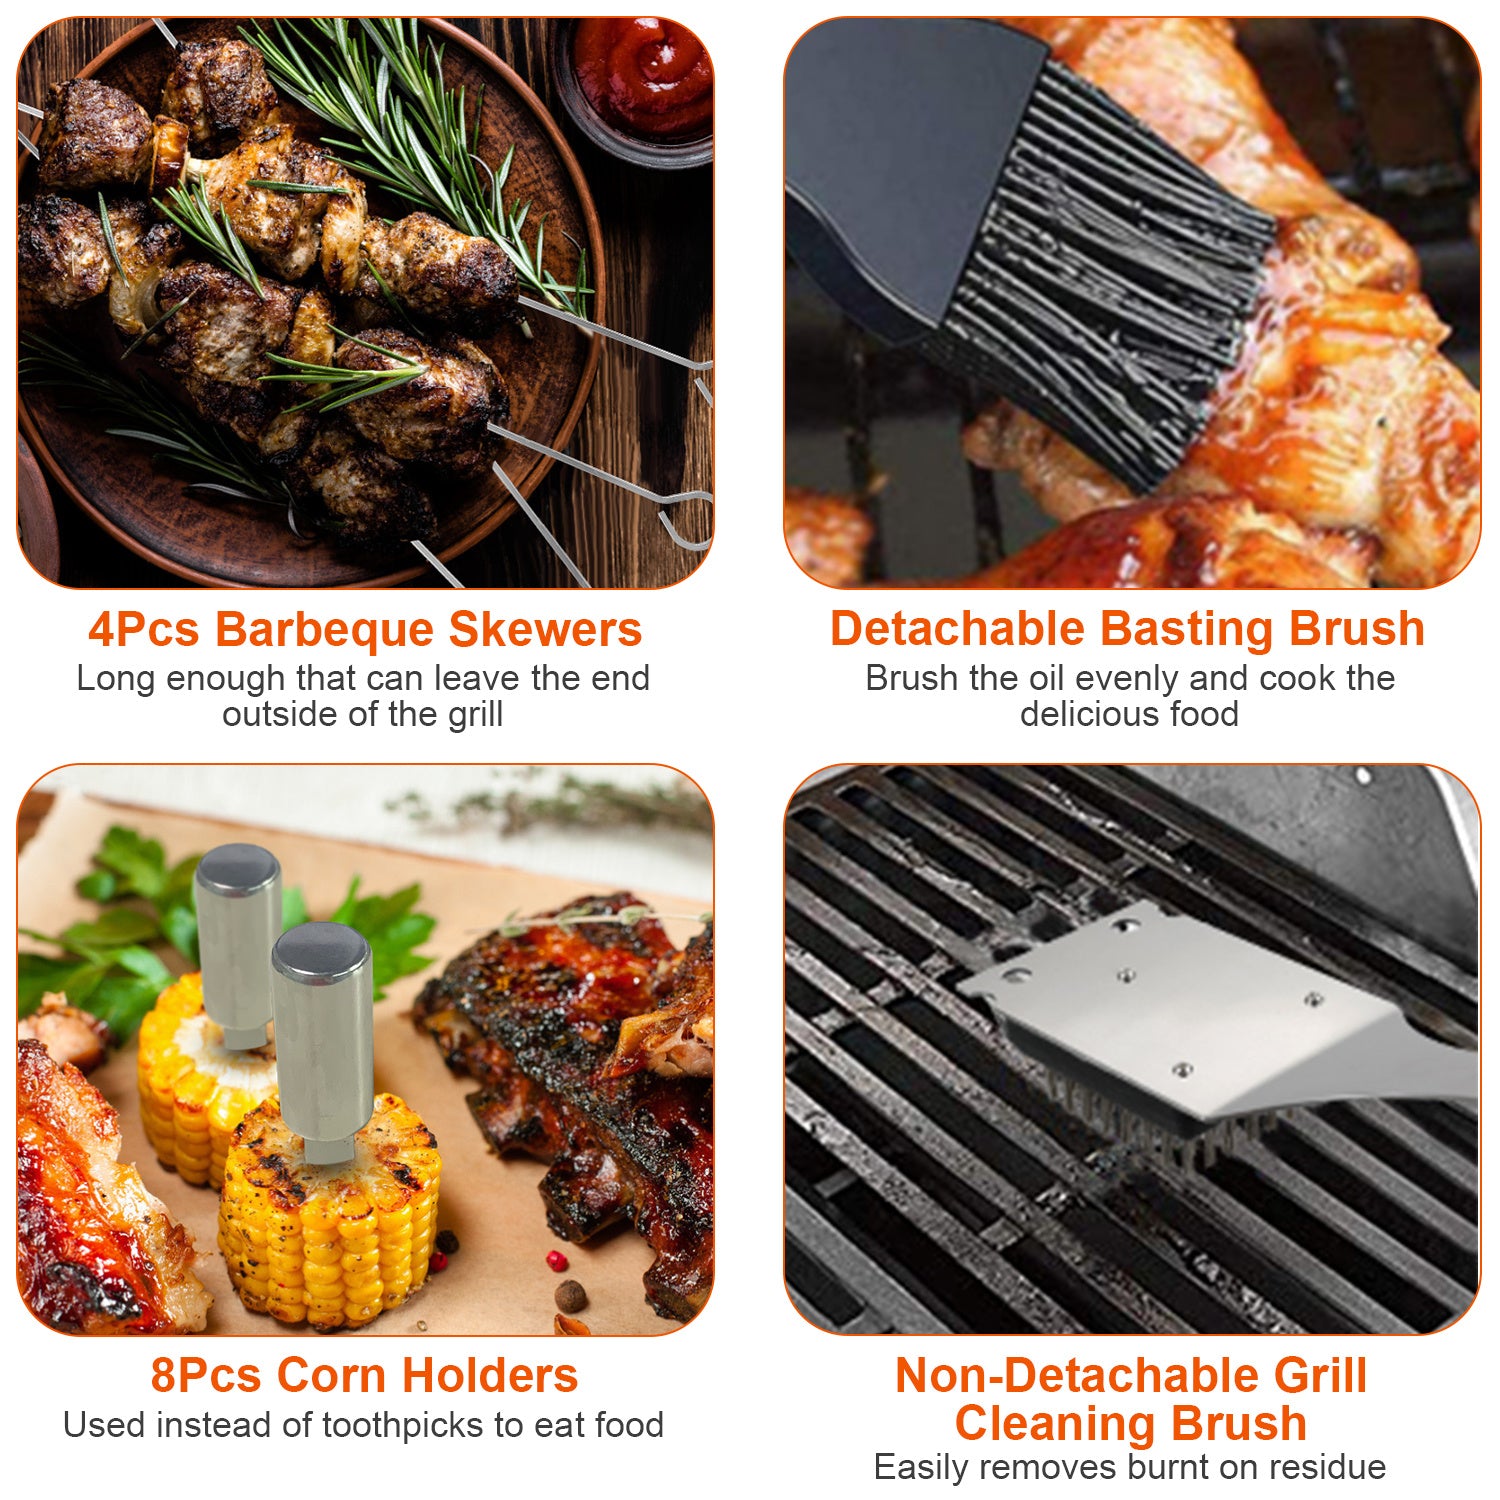 A set of Stainless Steel BBQ Grill Tool Kit Grilling Utensil Accessories with Spatula Tongs Fork Knife Brush Pepper Salt Shaker Bottle Grilled Skewers Corn Needles in a black case.